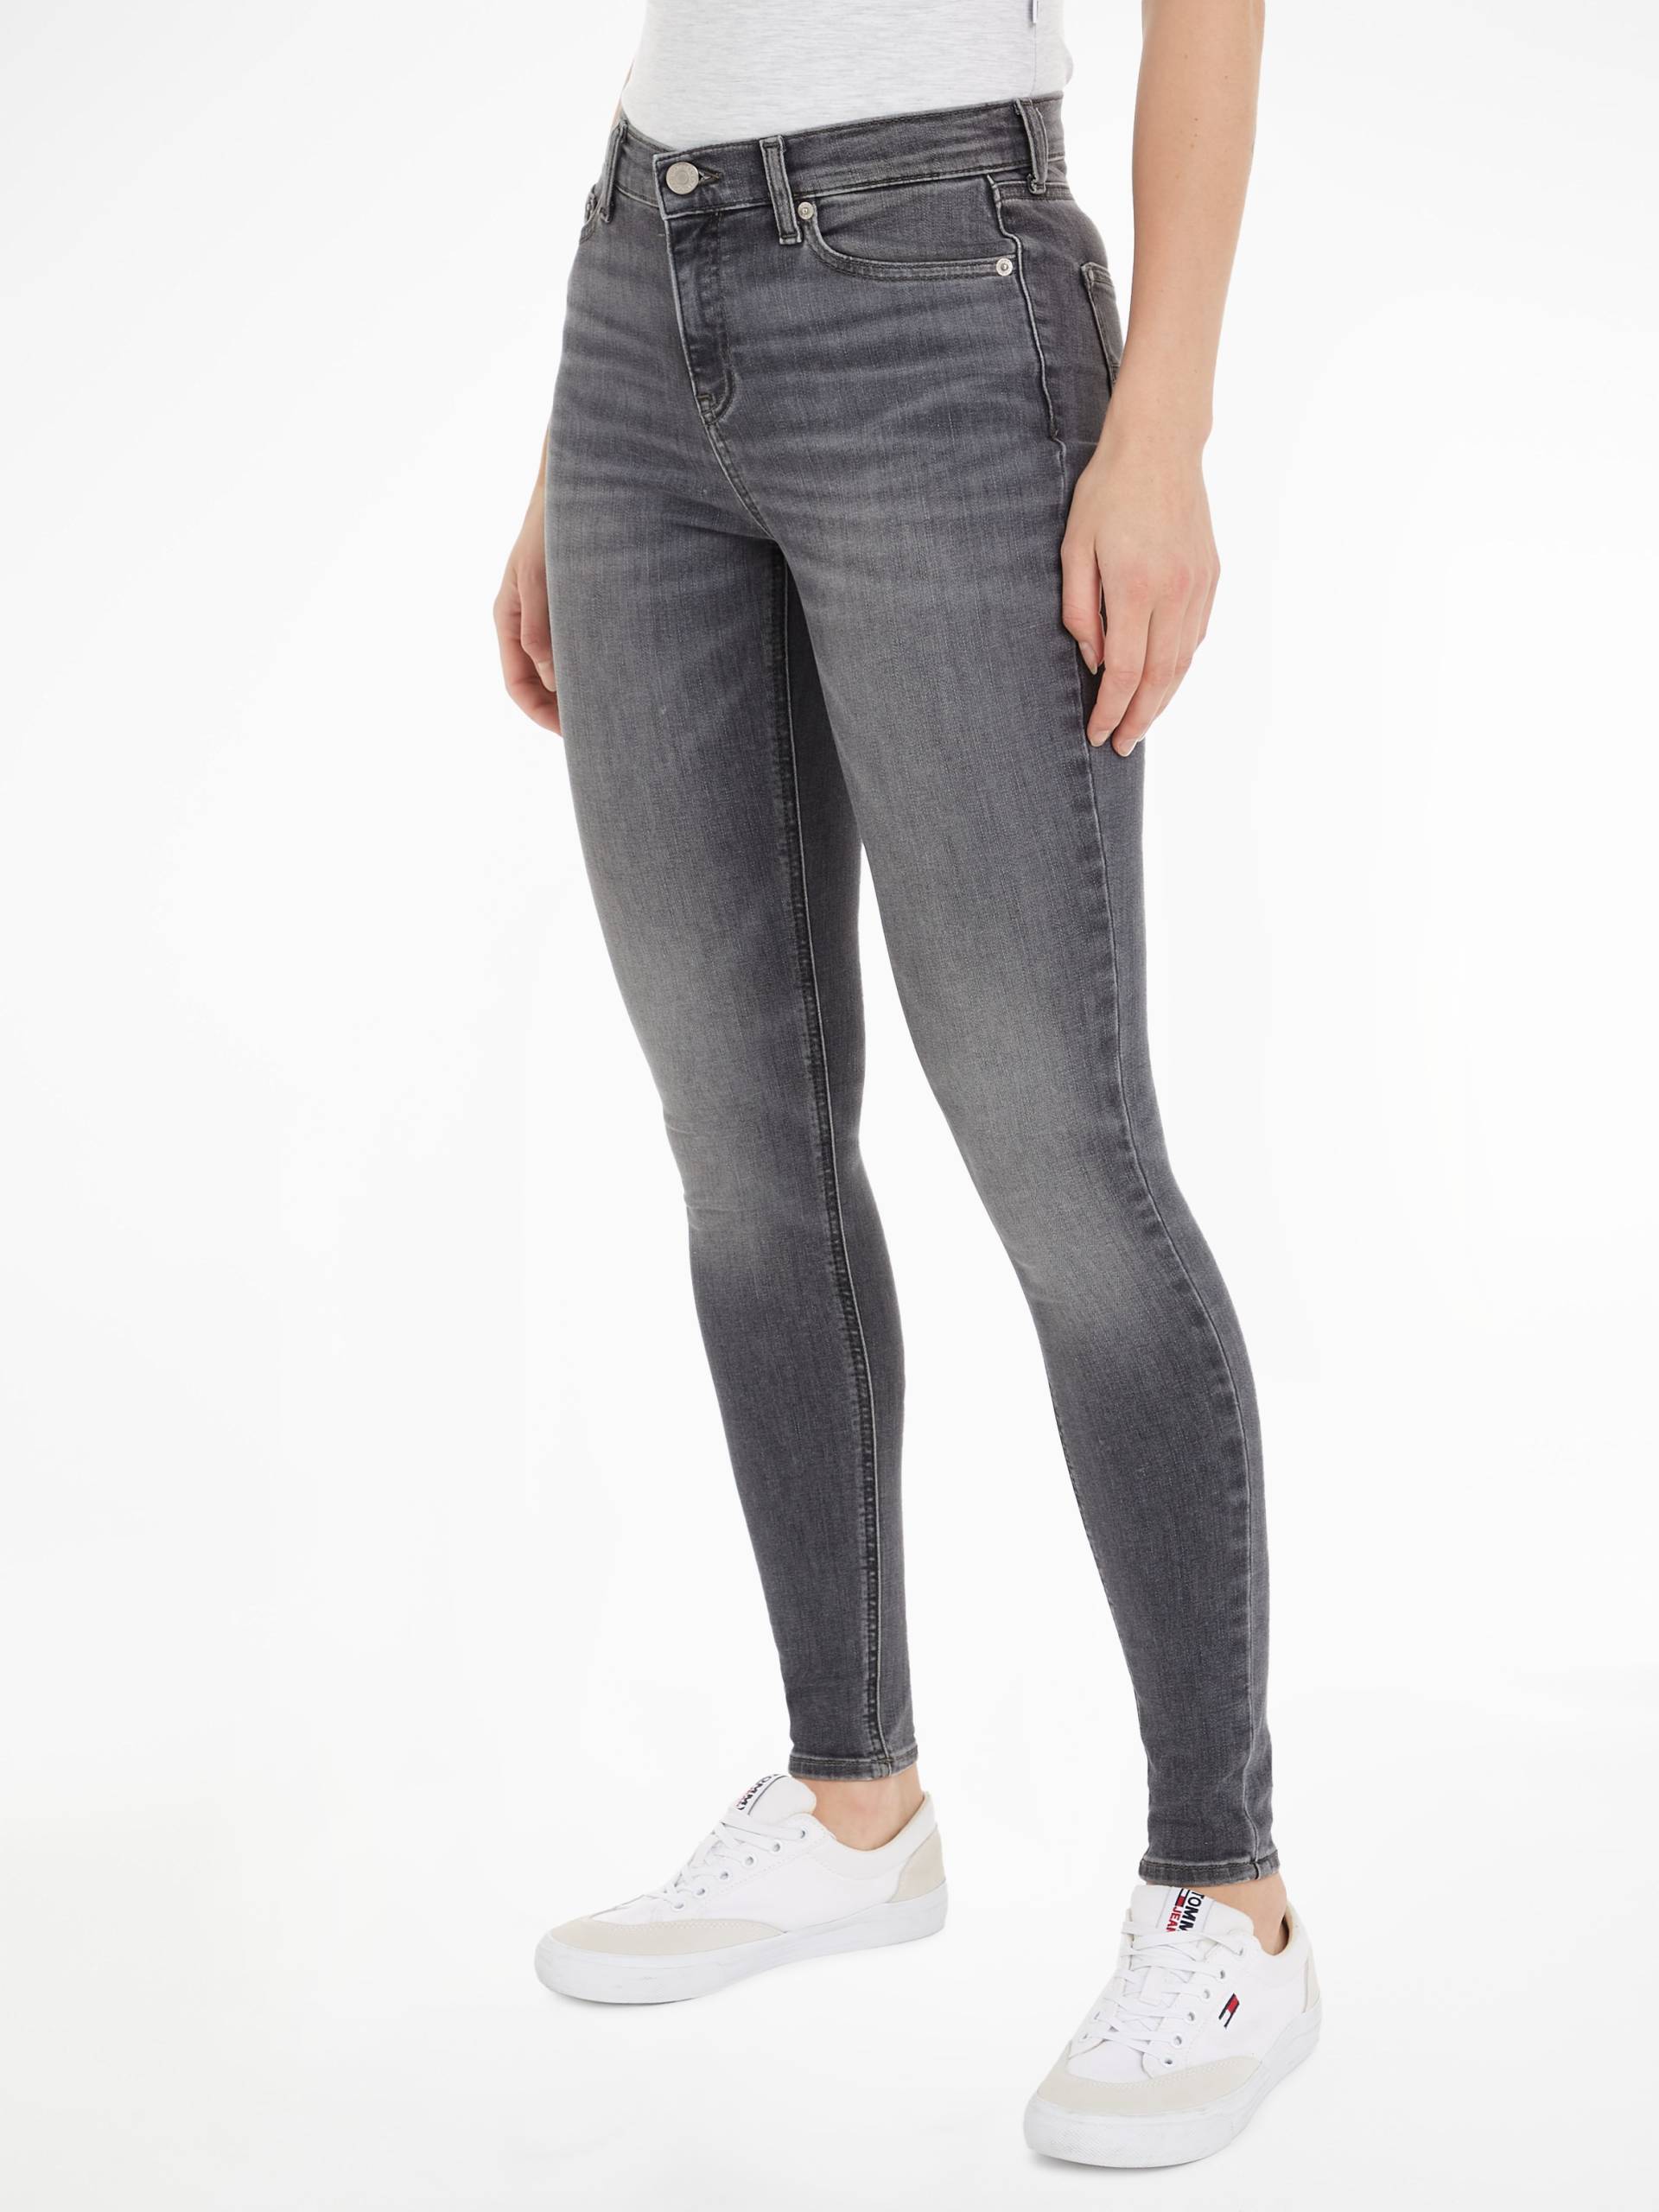 Tommy Jeans Skinny-fit-Jeans »Tommy Jeans - Damenjeans- NORA Mid Rise - Skinny Fit«, mit Waschung, Logo-Badge von Tommy Jeans